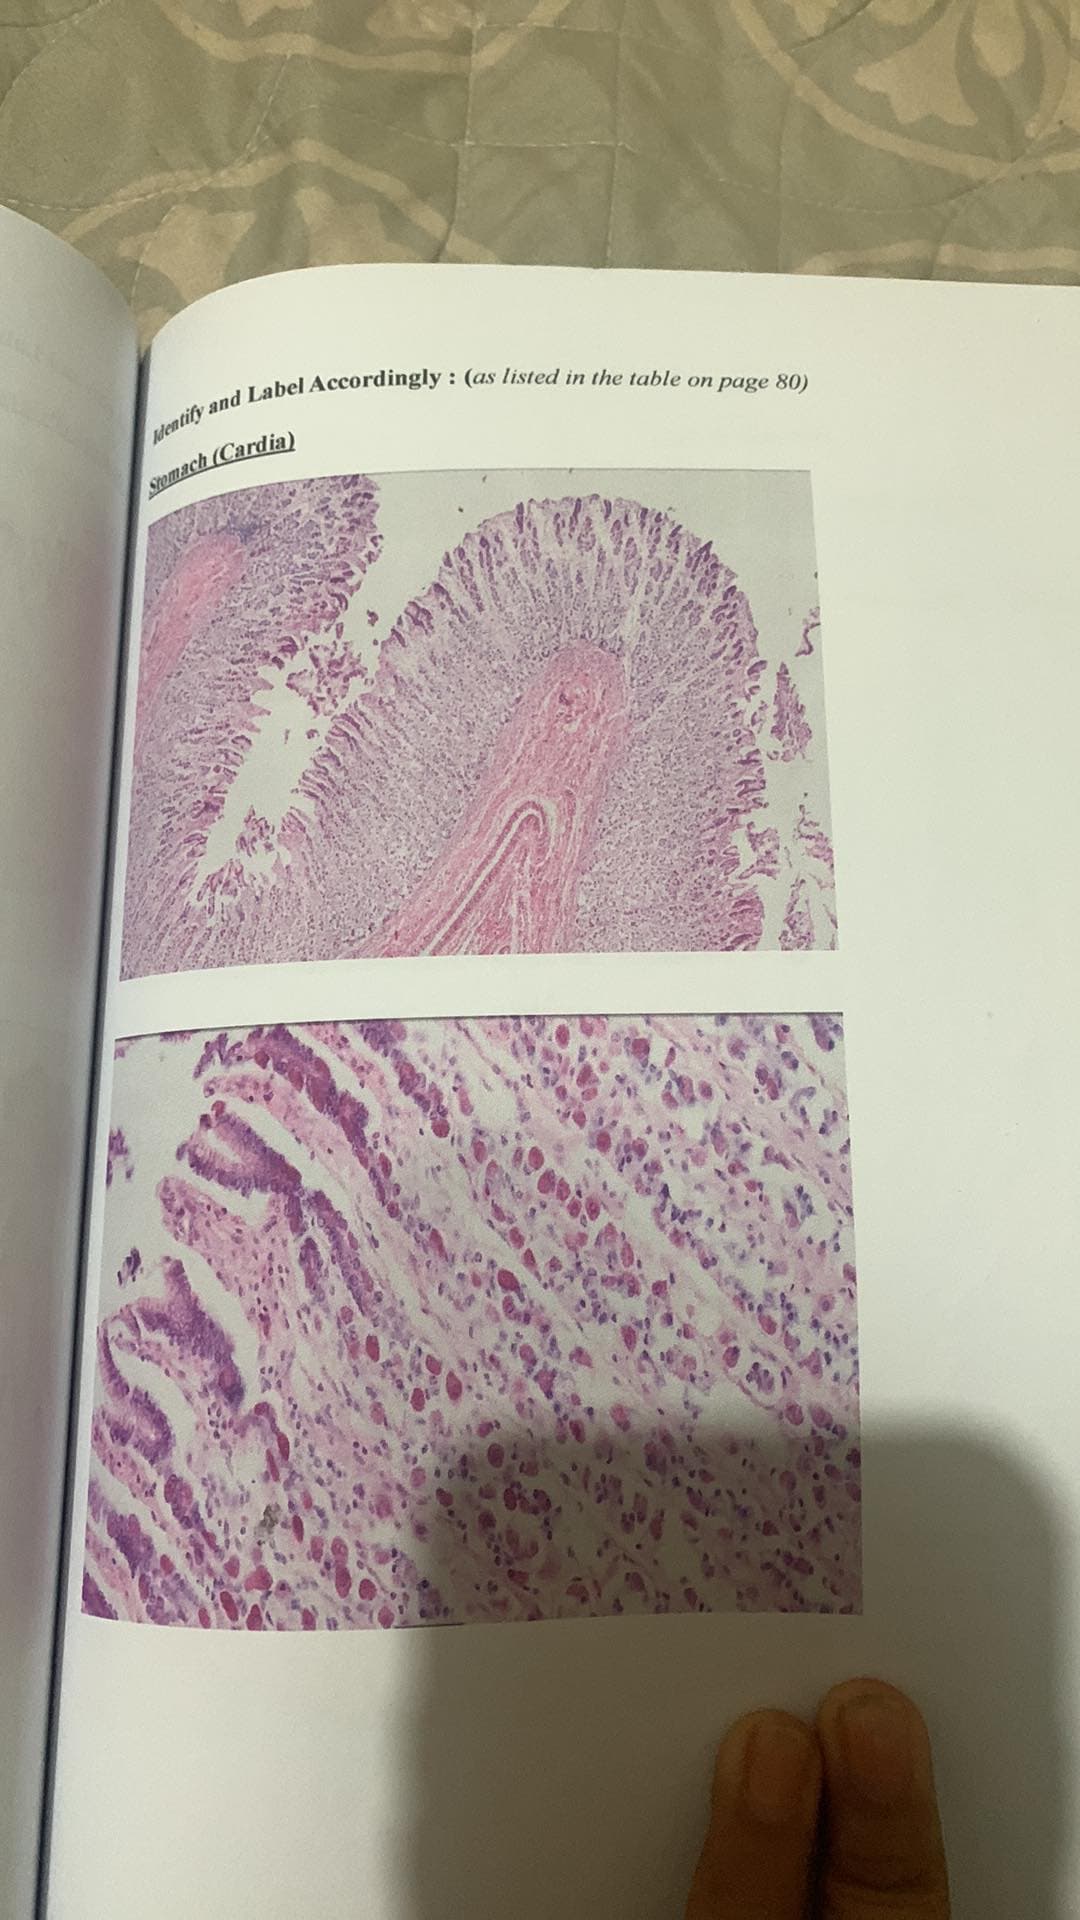 Identify and Label Accordingly: (as listed in the table on page 80)
Stomach
(Cardia)